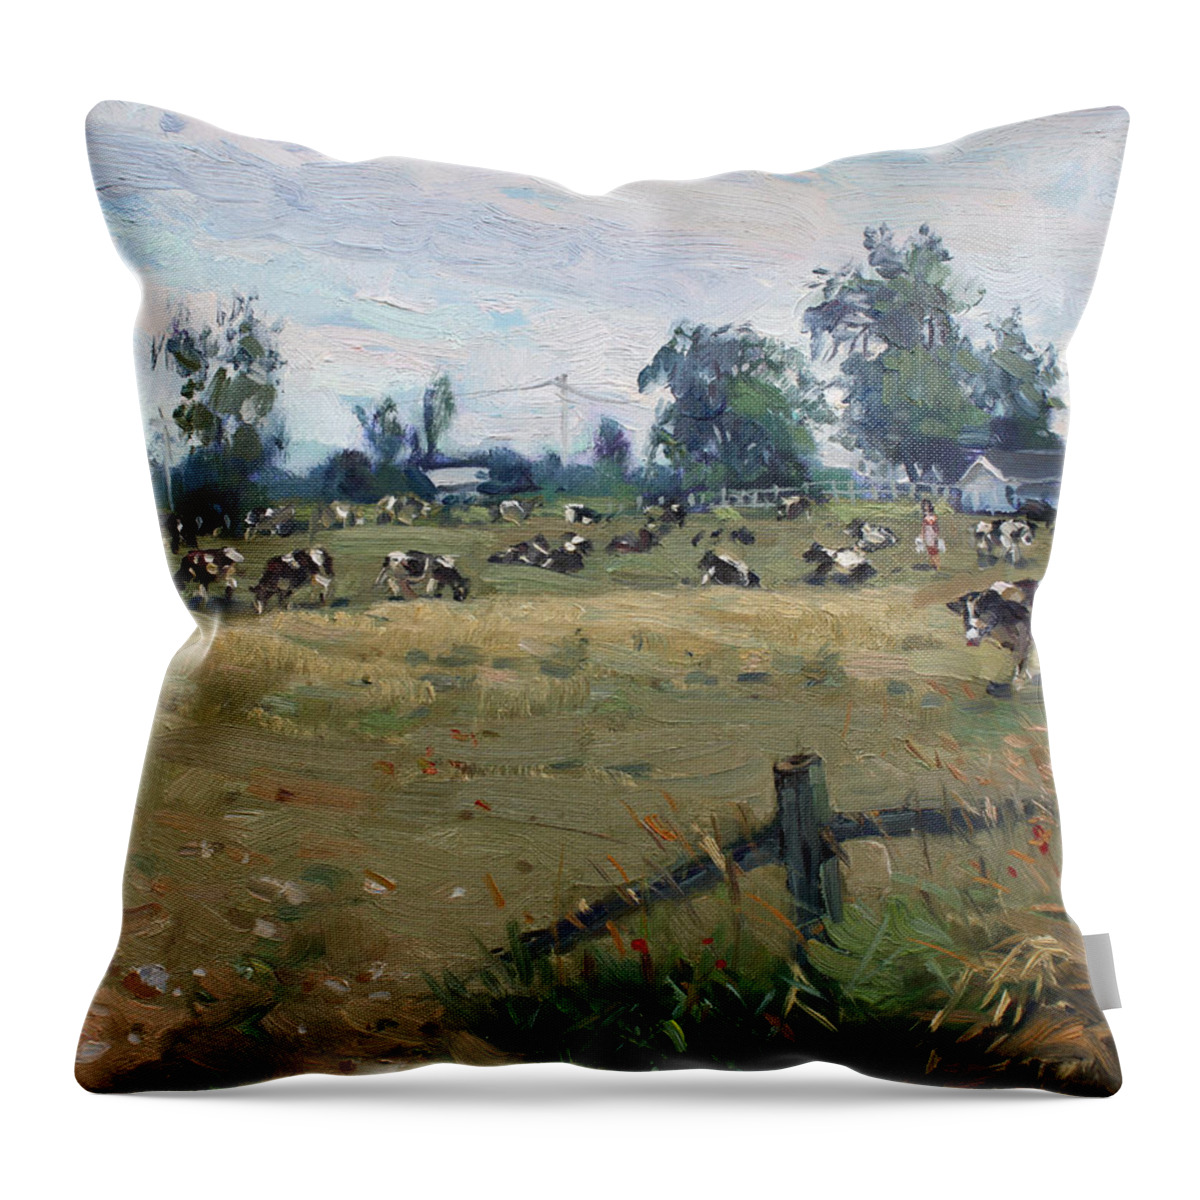 Farm Throw Pillow featuring the painting Farm in Terra Cotta ON by Ylli Haruni